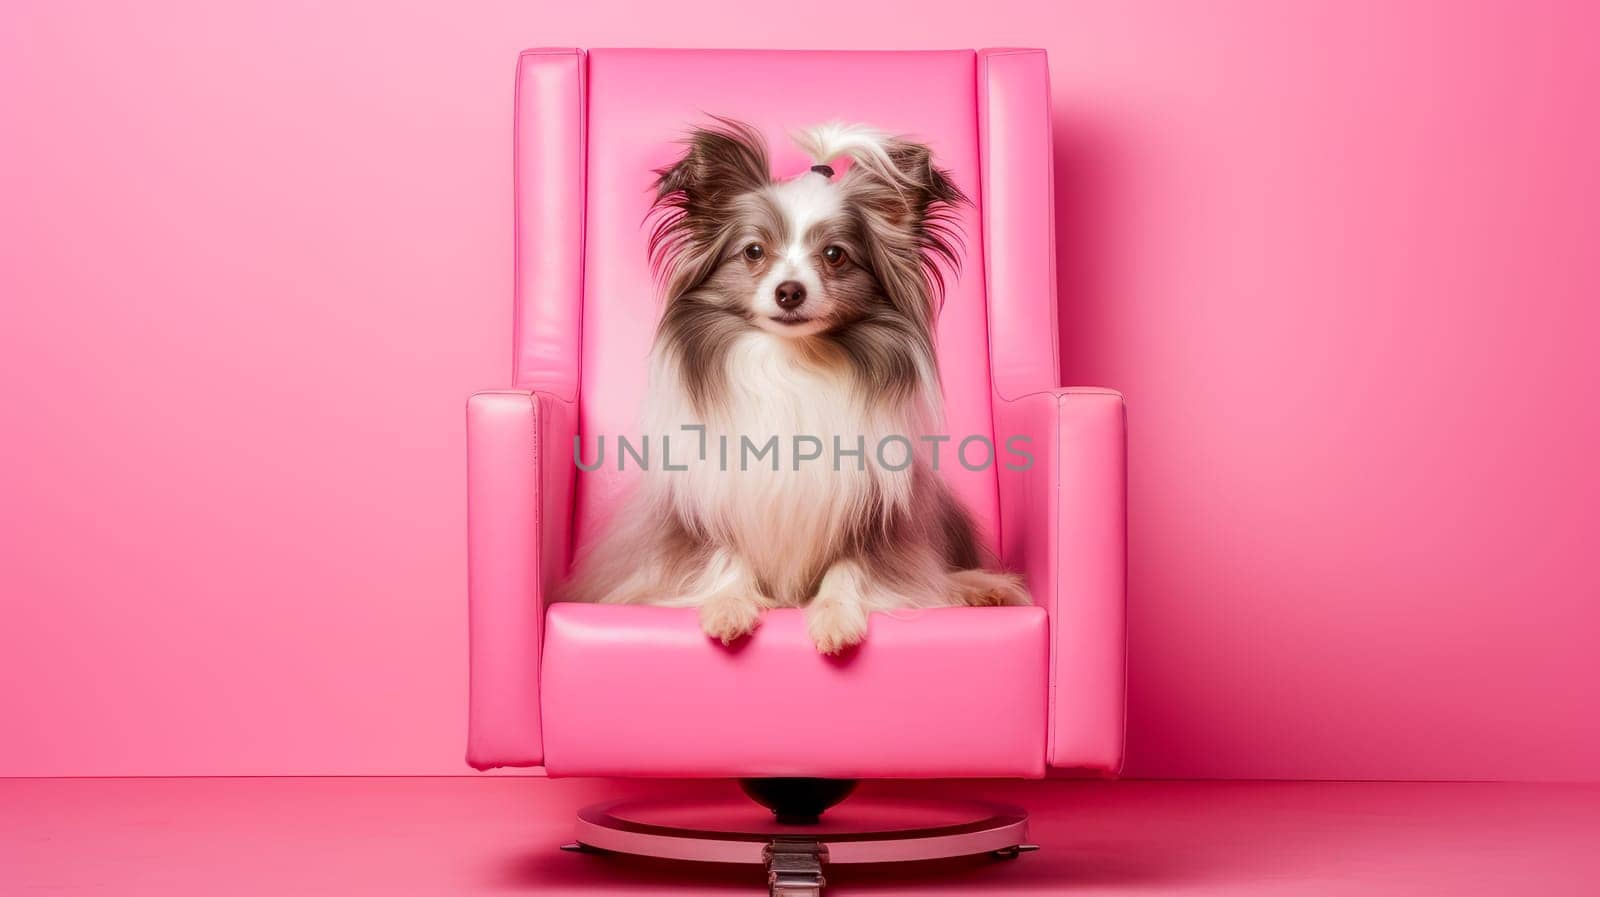 A small dog sits in a chair on a pink background, waiting for its turn for procedures. Animal grooming, grooming, groomer, animal spa, pet store, online store for animals, animal hotel, copy space, boutique.